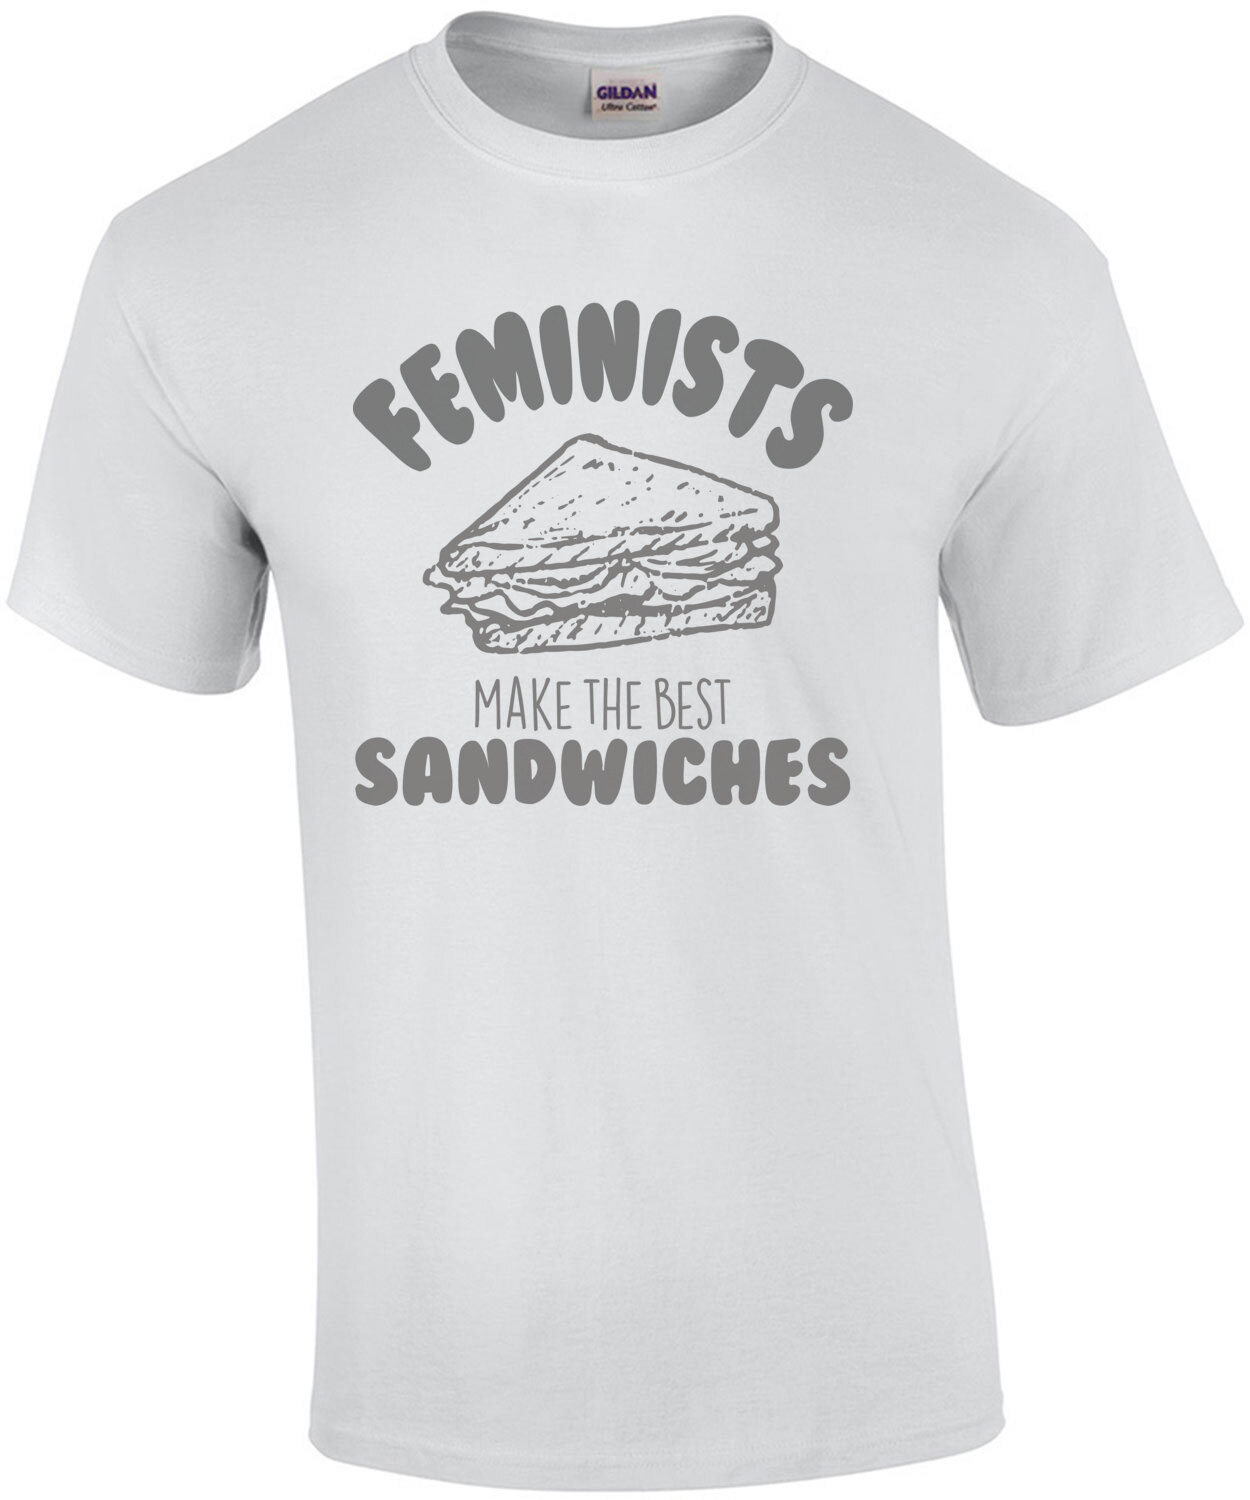 Feminests Make The Best Sandwiches - Funny Sarcastic T-Shirt